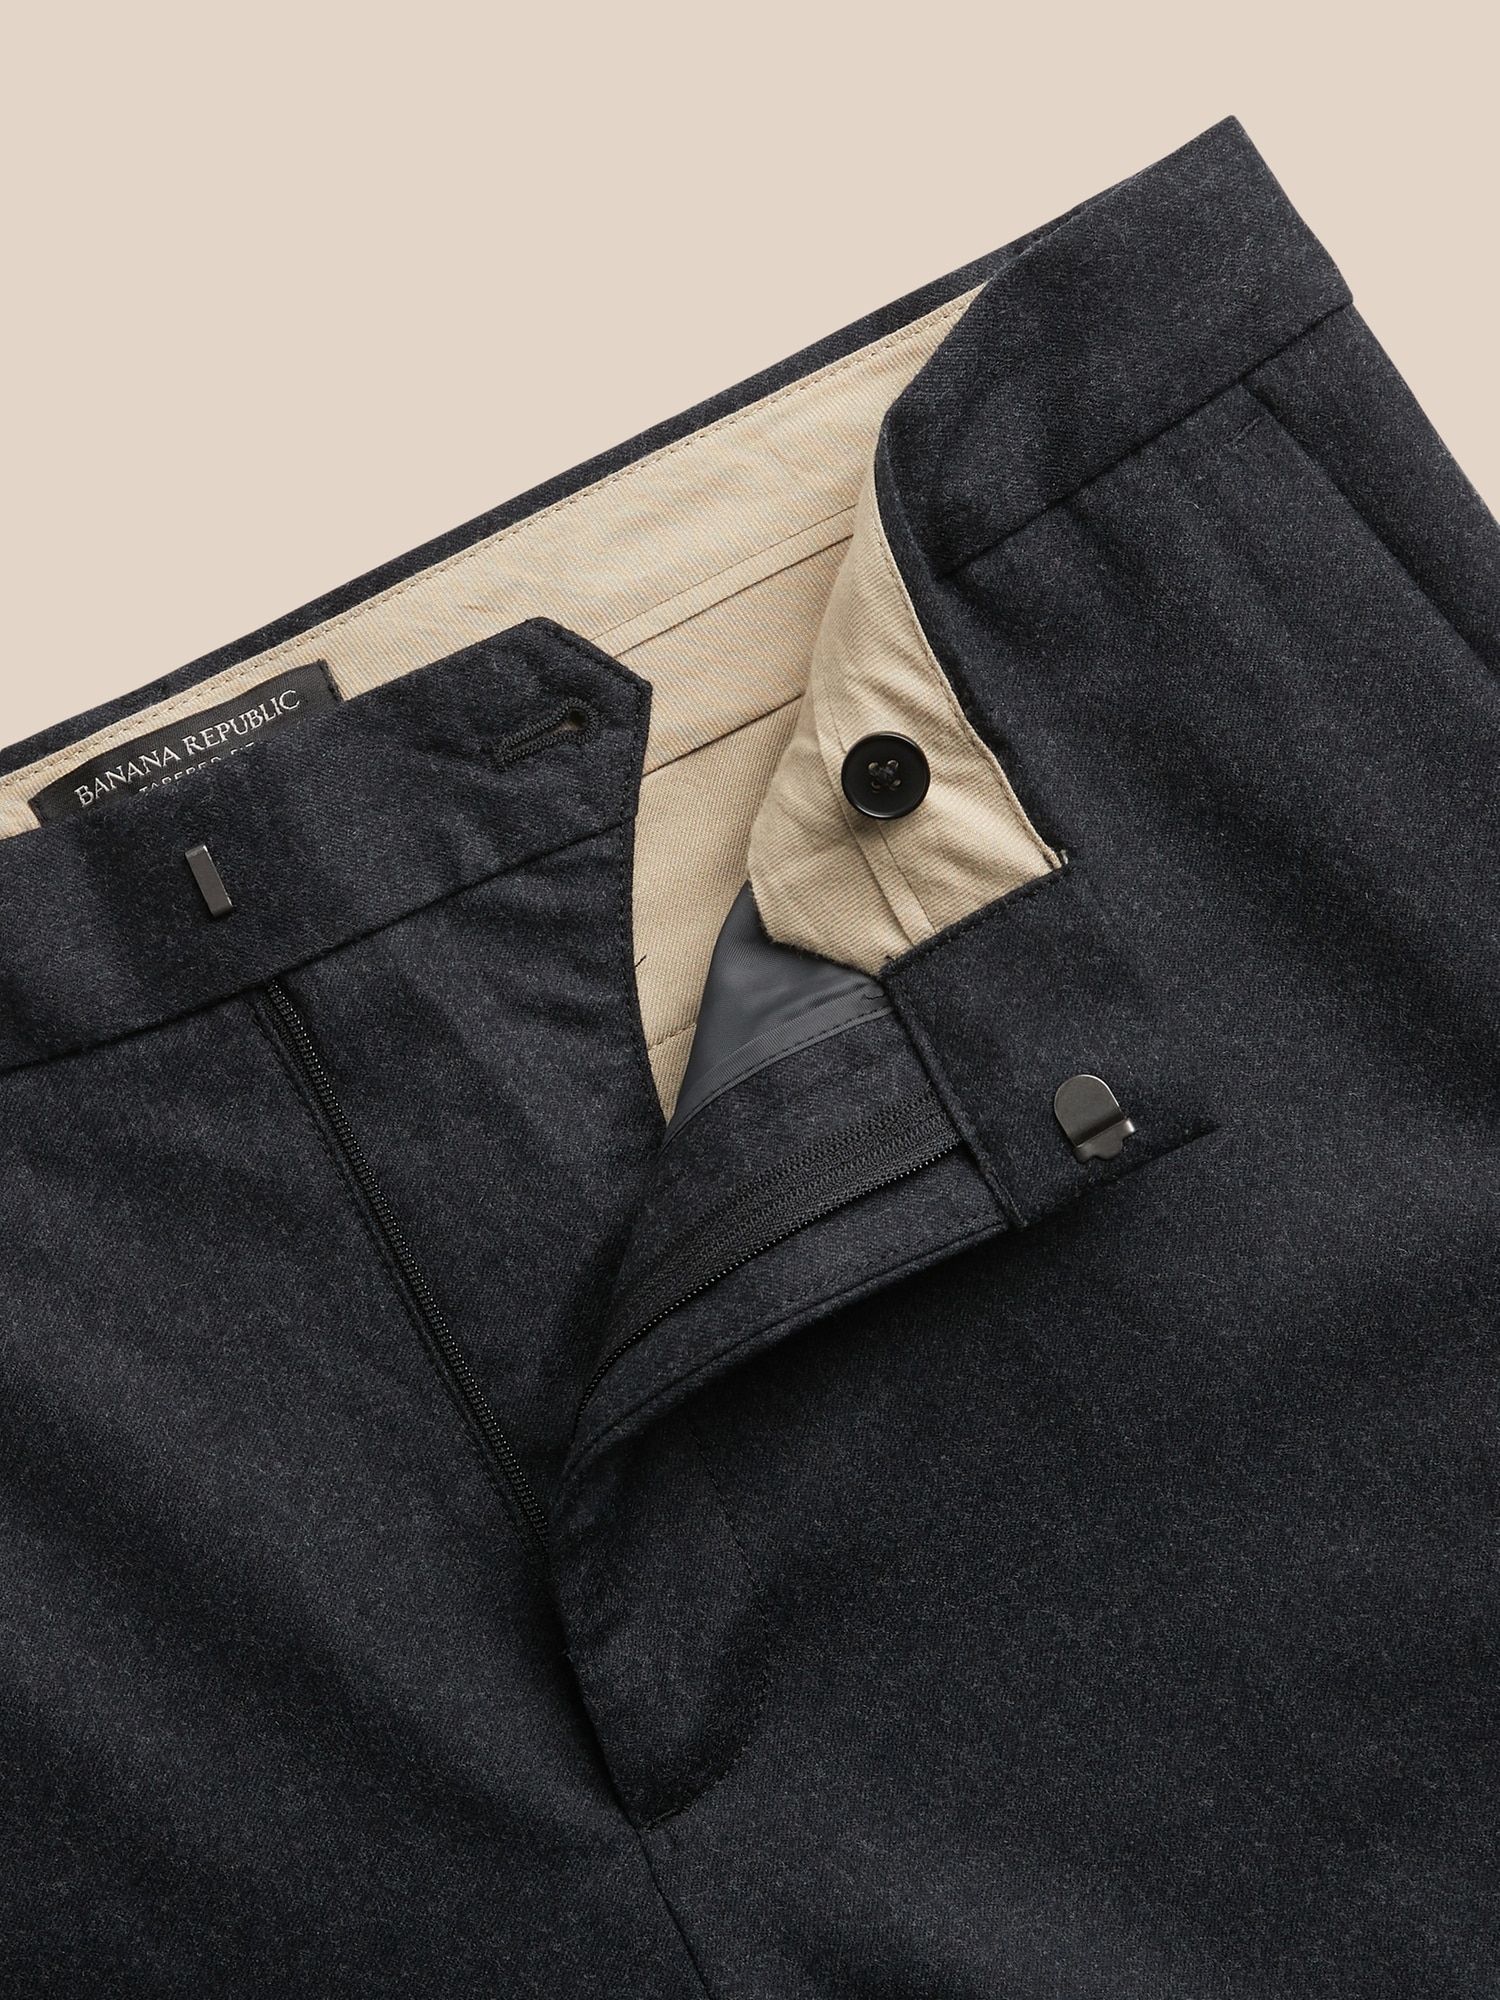 Tapered Perfect Flannel Dress Pant